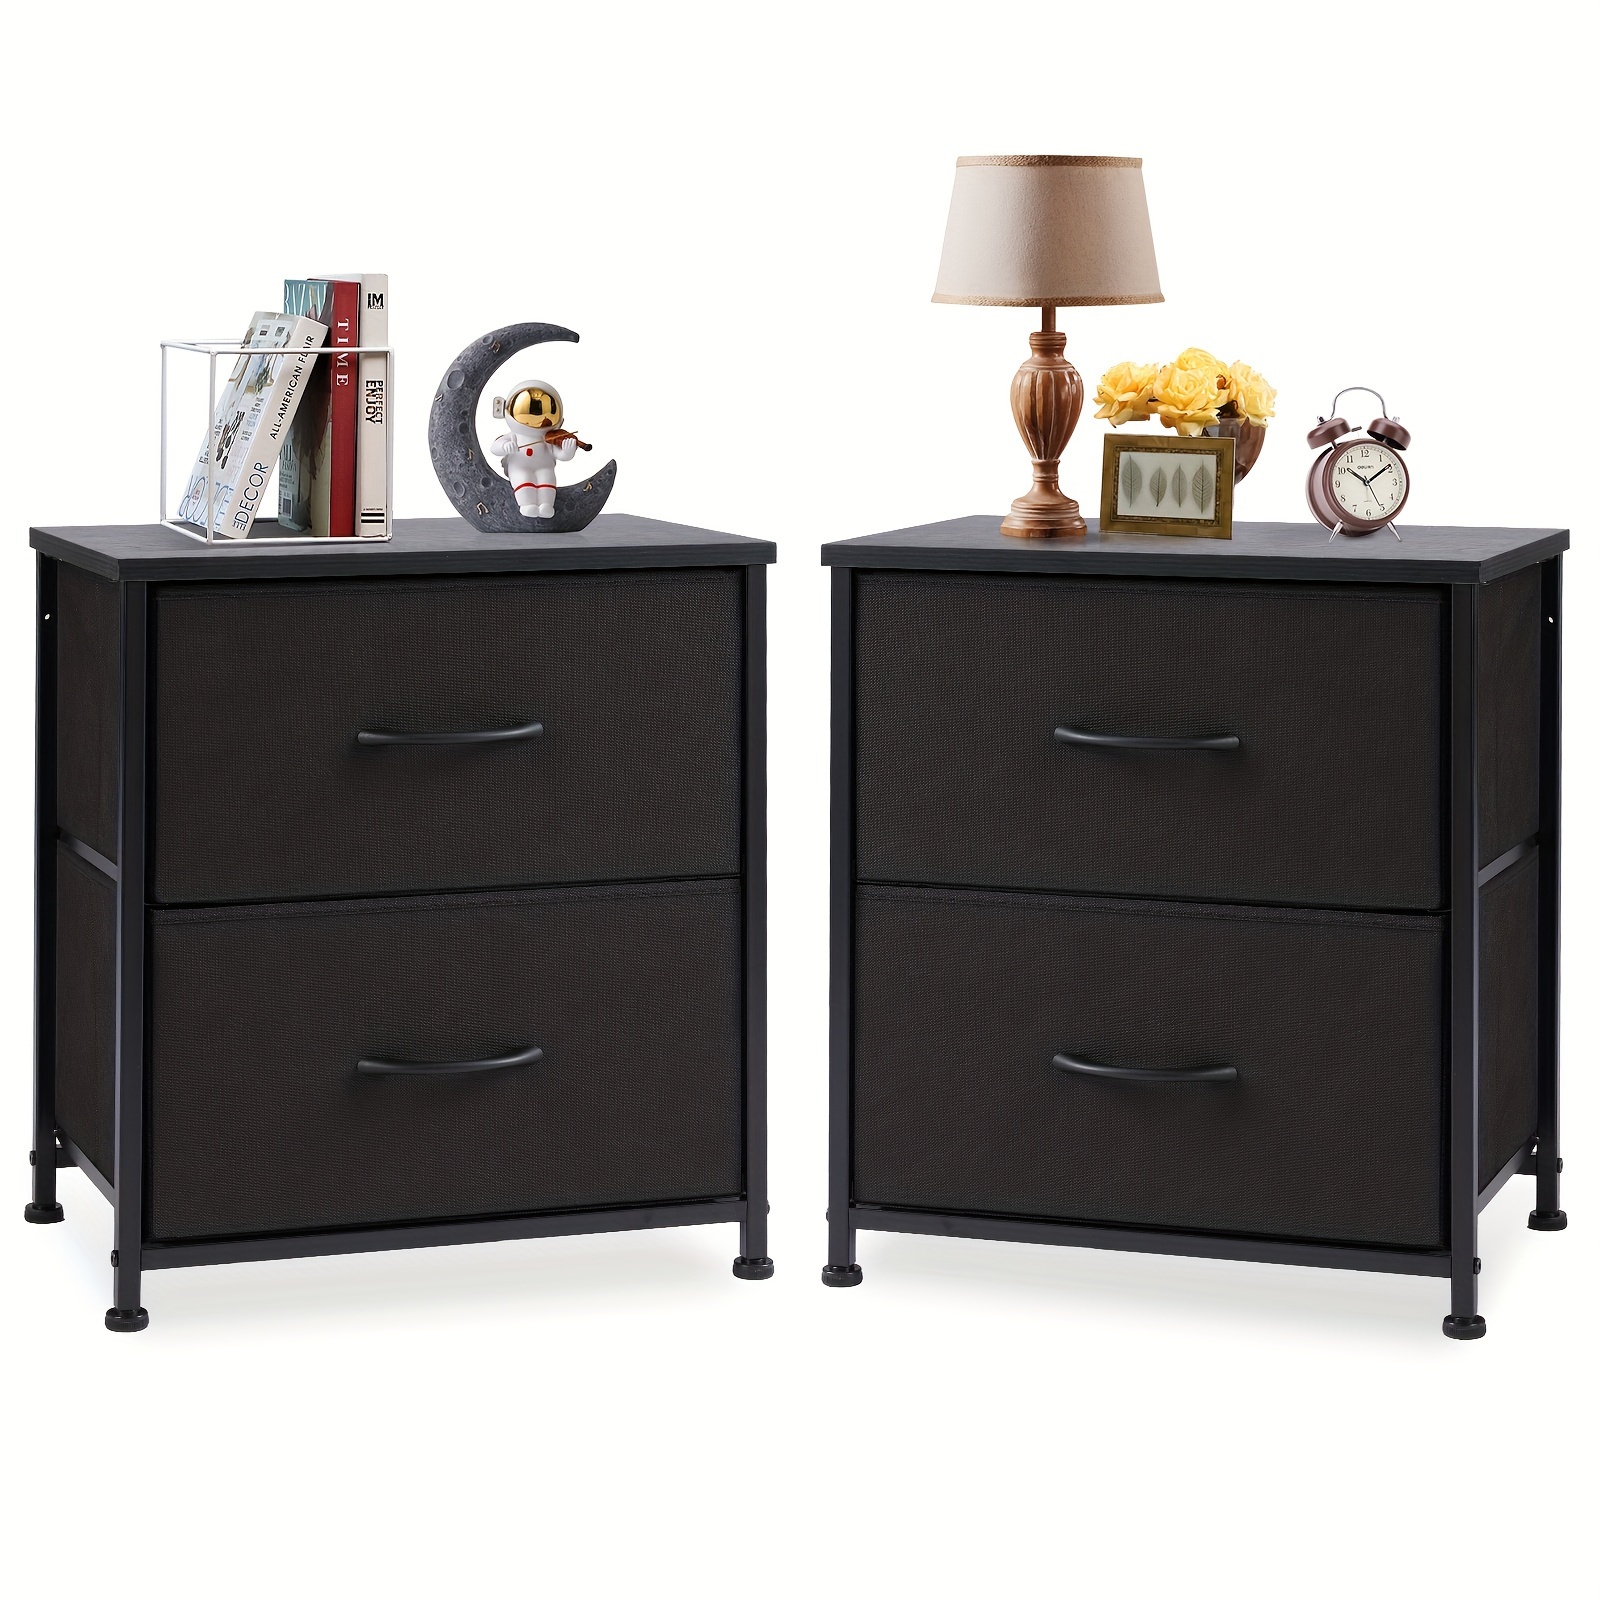 

Sweetcrispy Small Nightstand Set Of 2 With 2 Drawers, Bedside End Table, Nightstand For Bedroom, Wardrobe For Boys And Girls, Living Room Furniture, Dorm, Entryway, Black